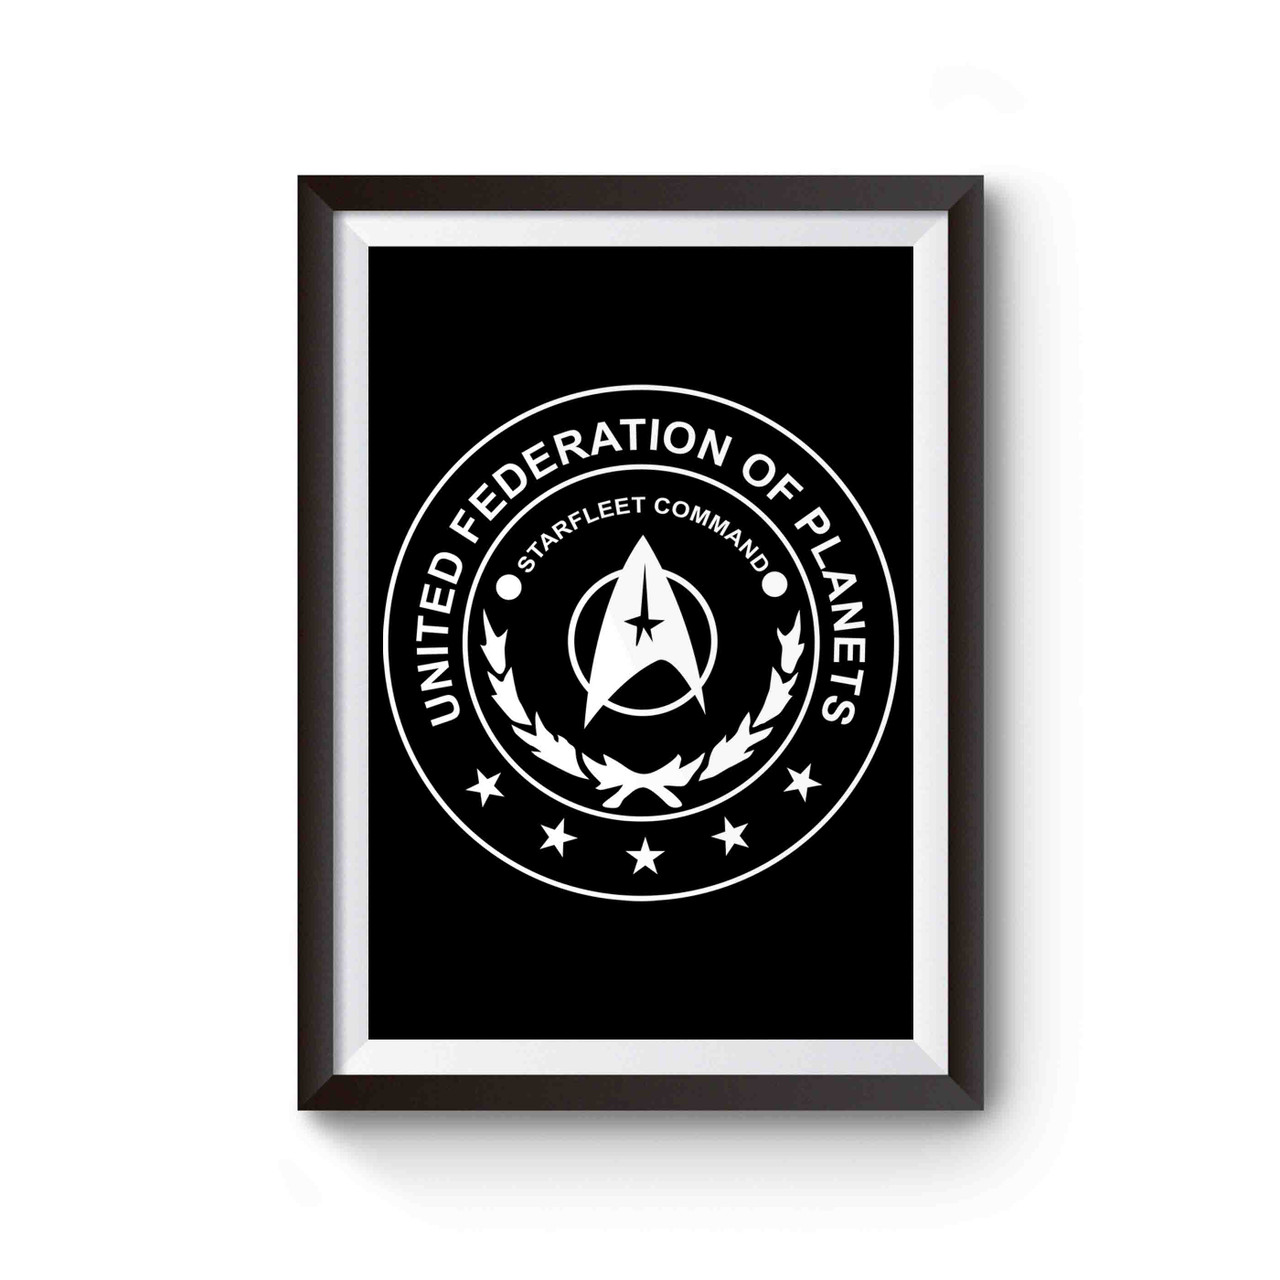 united federation of planets poster